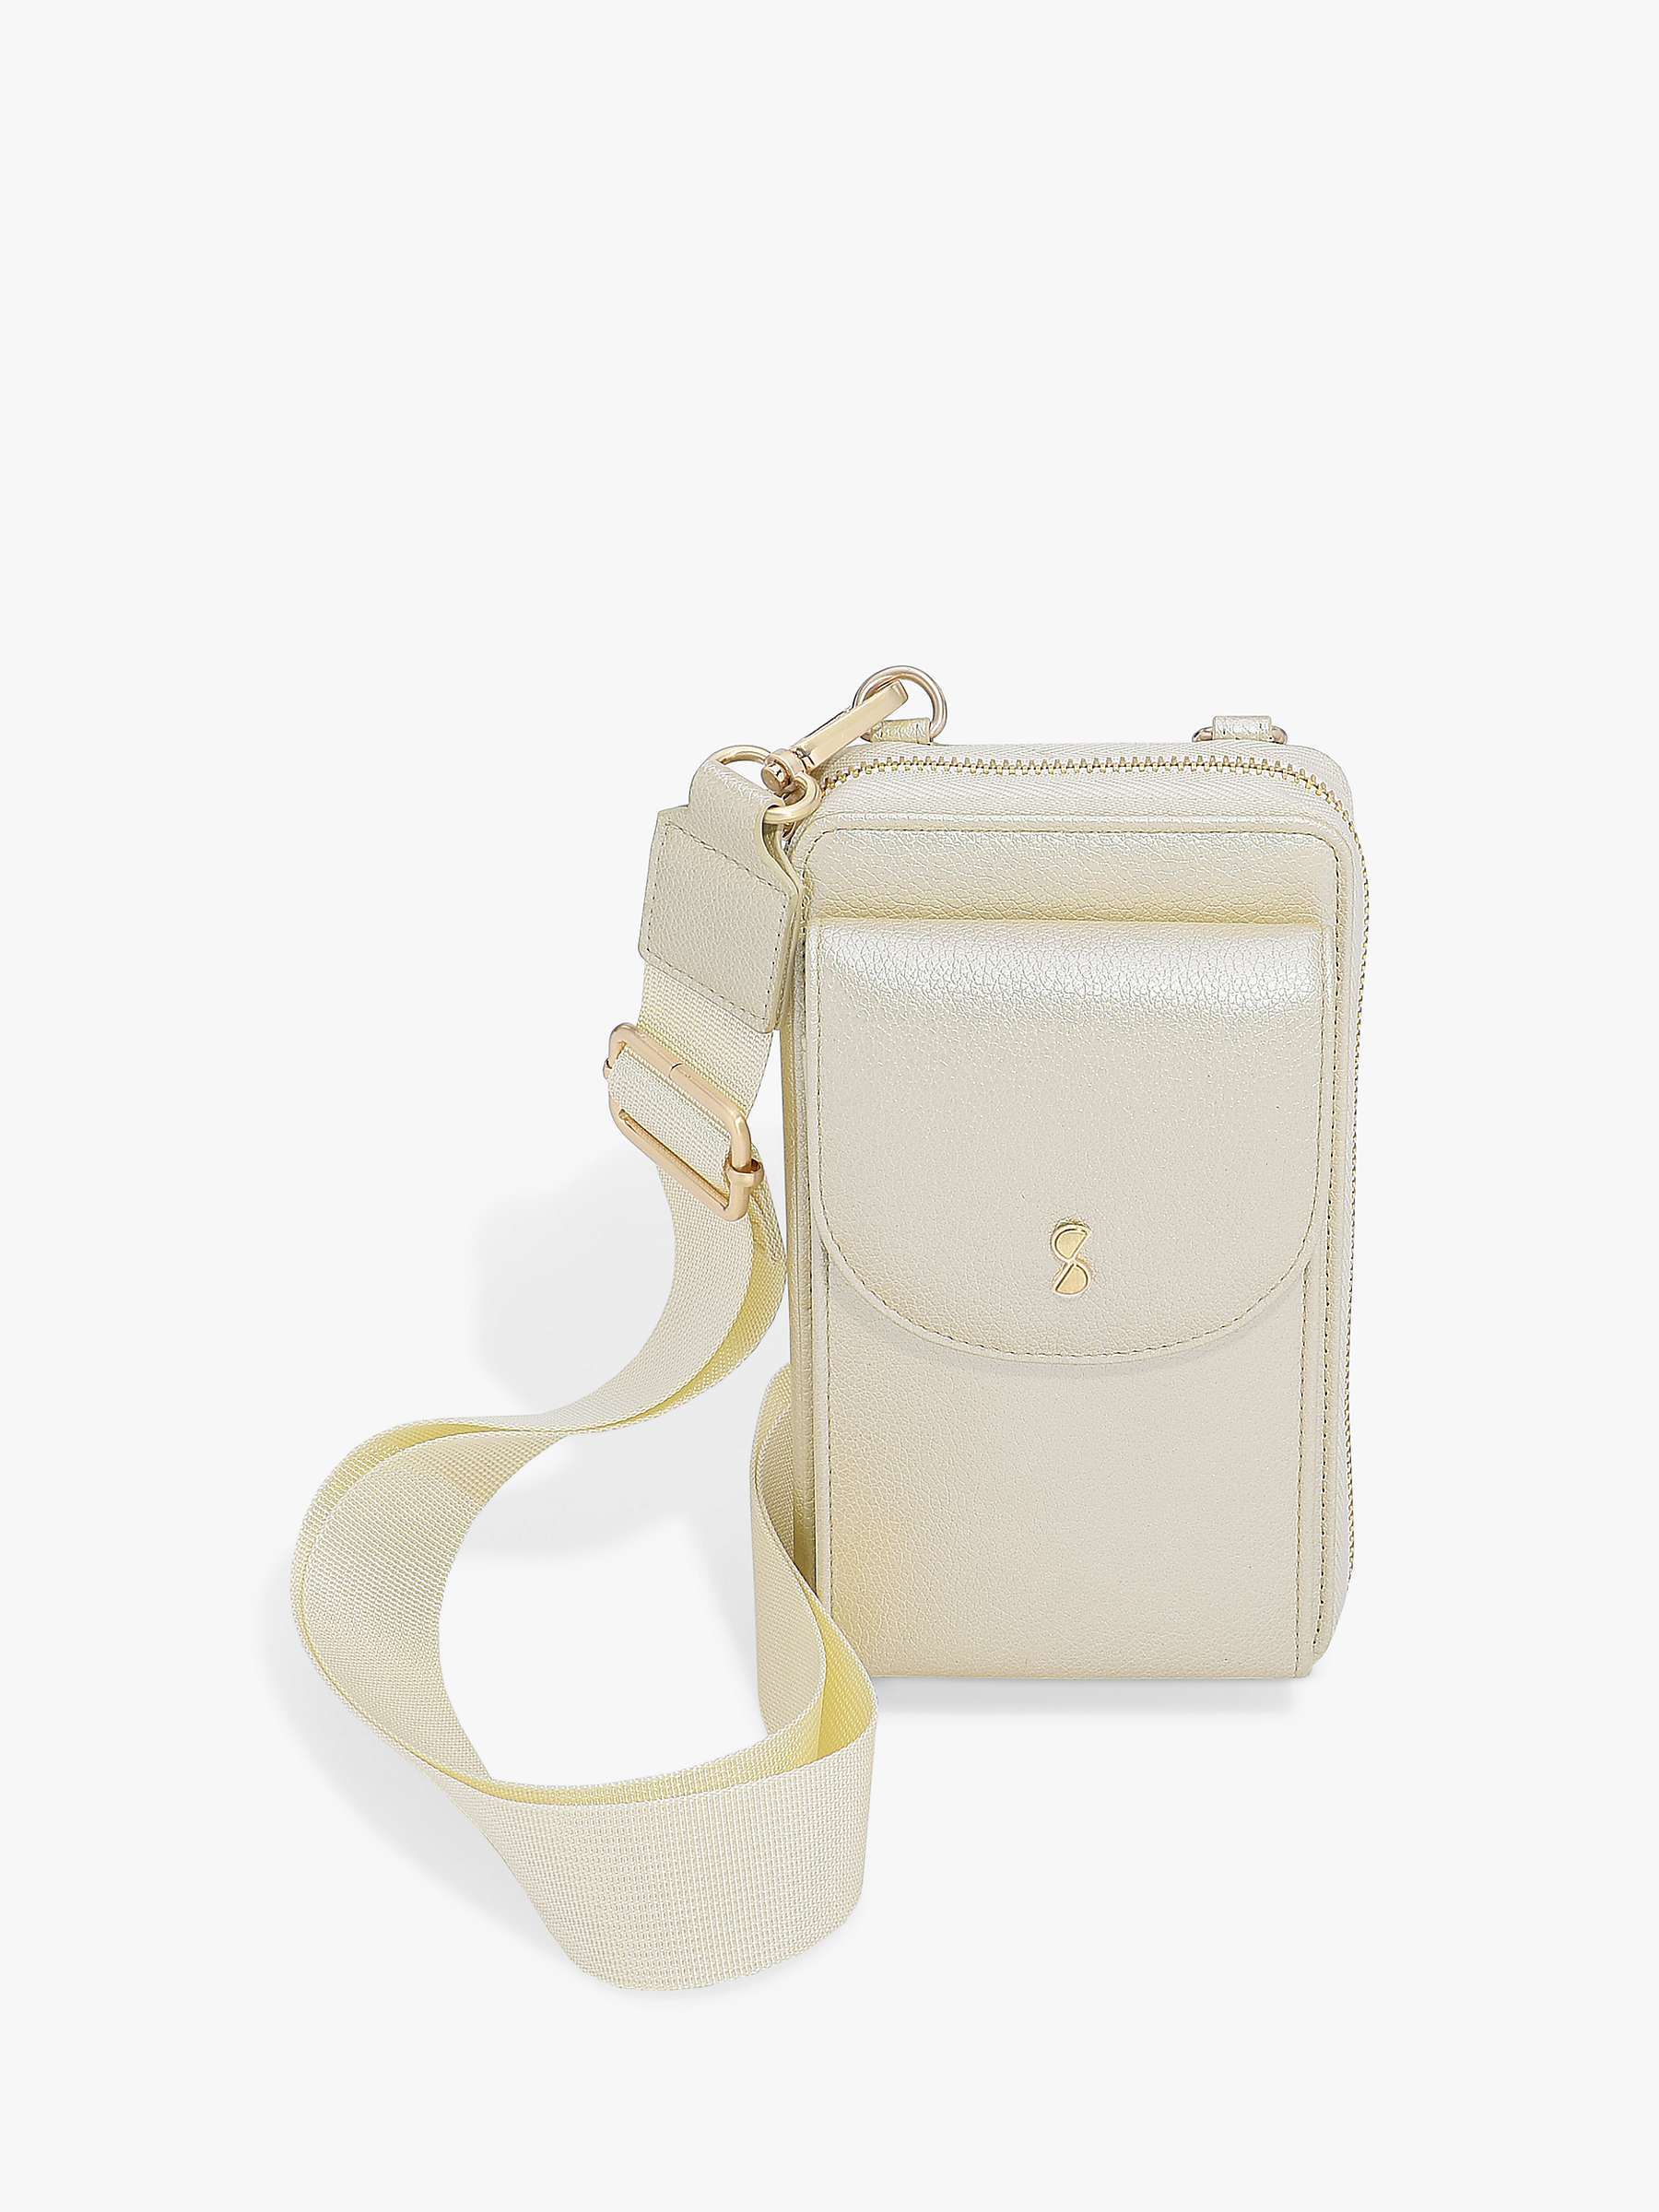 Buy Stackers Faux Leather Mini Cross Body Bag, Iridescent Online at johnlewis.com